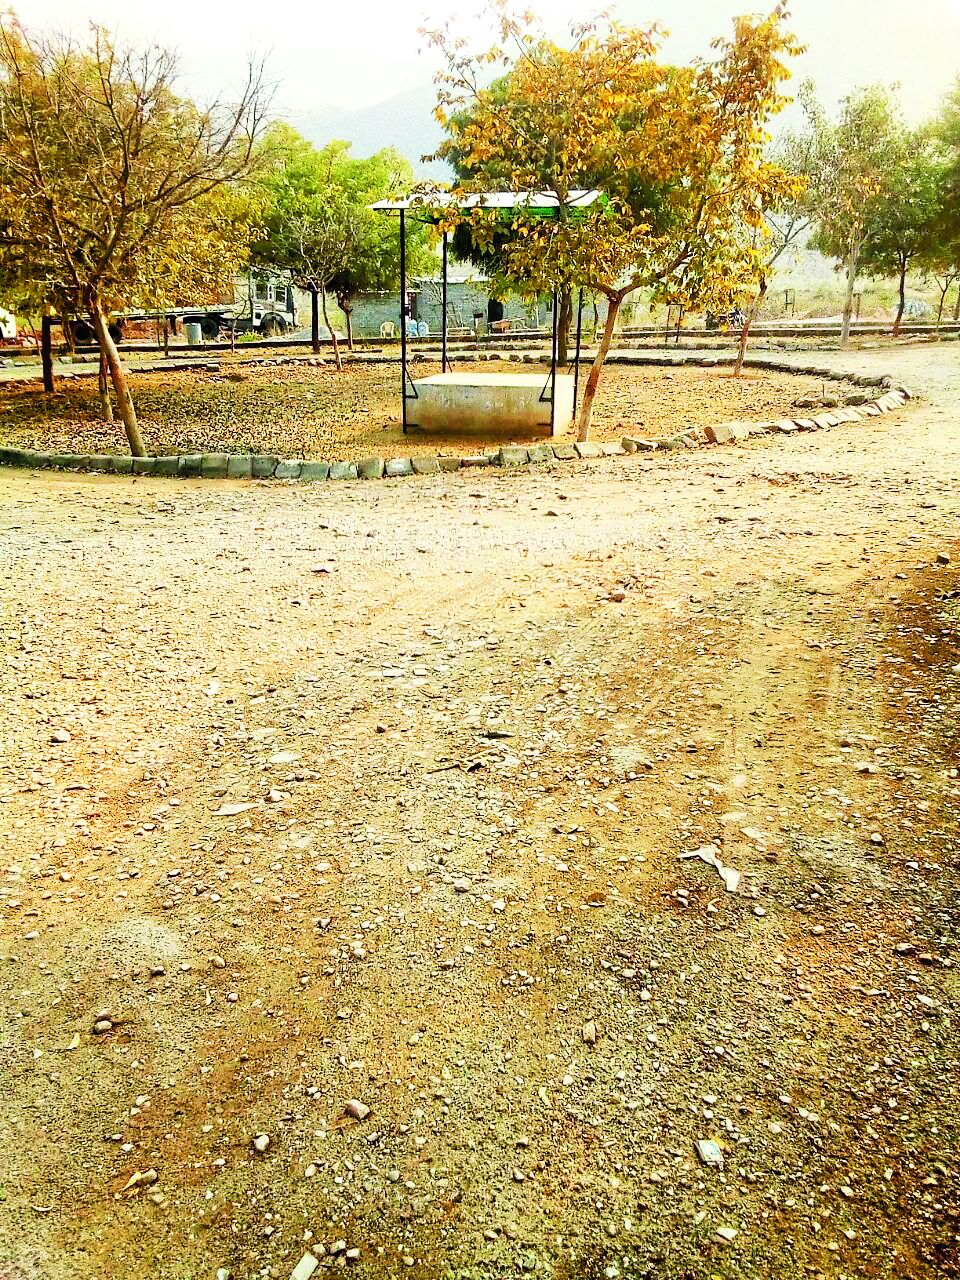 Bad condition of driving test track in alwar rto office